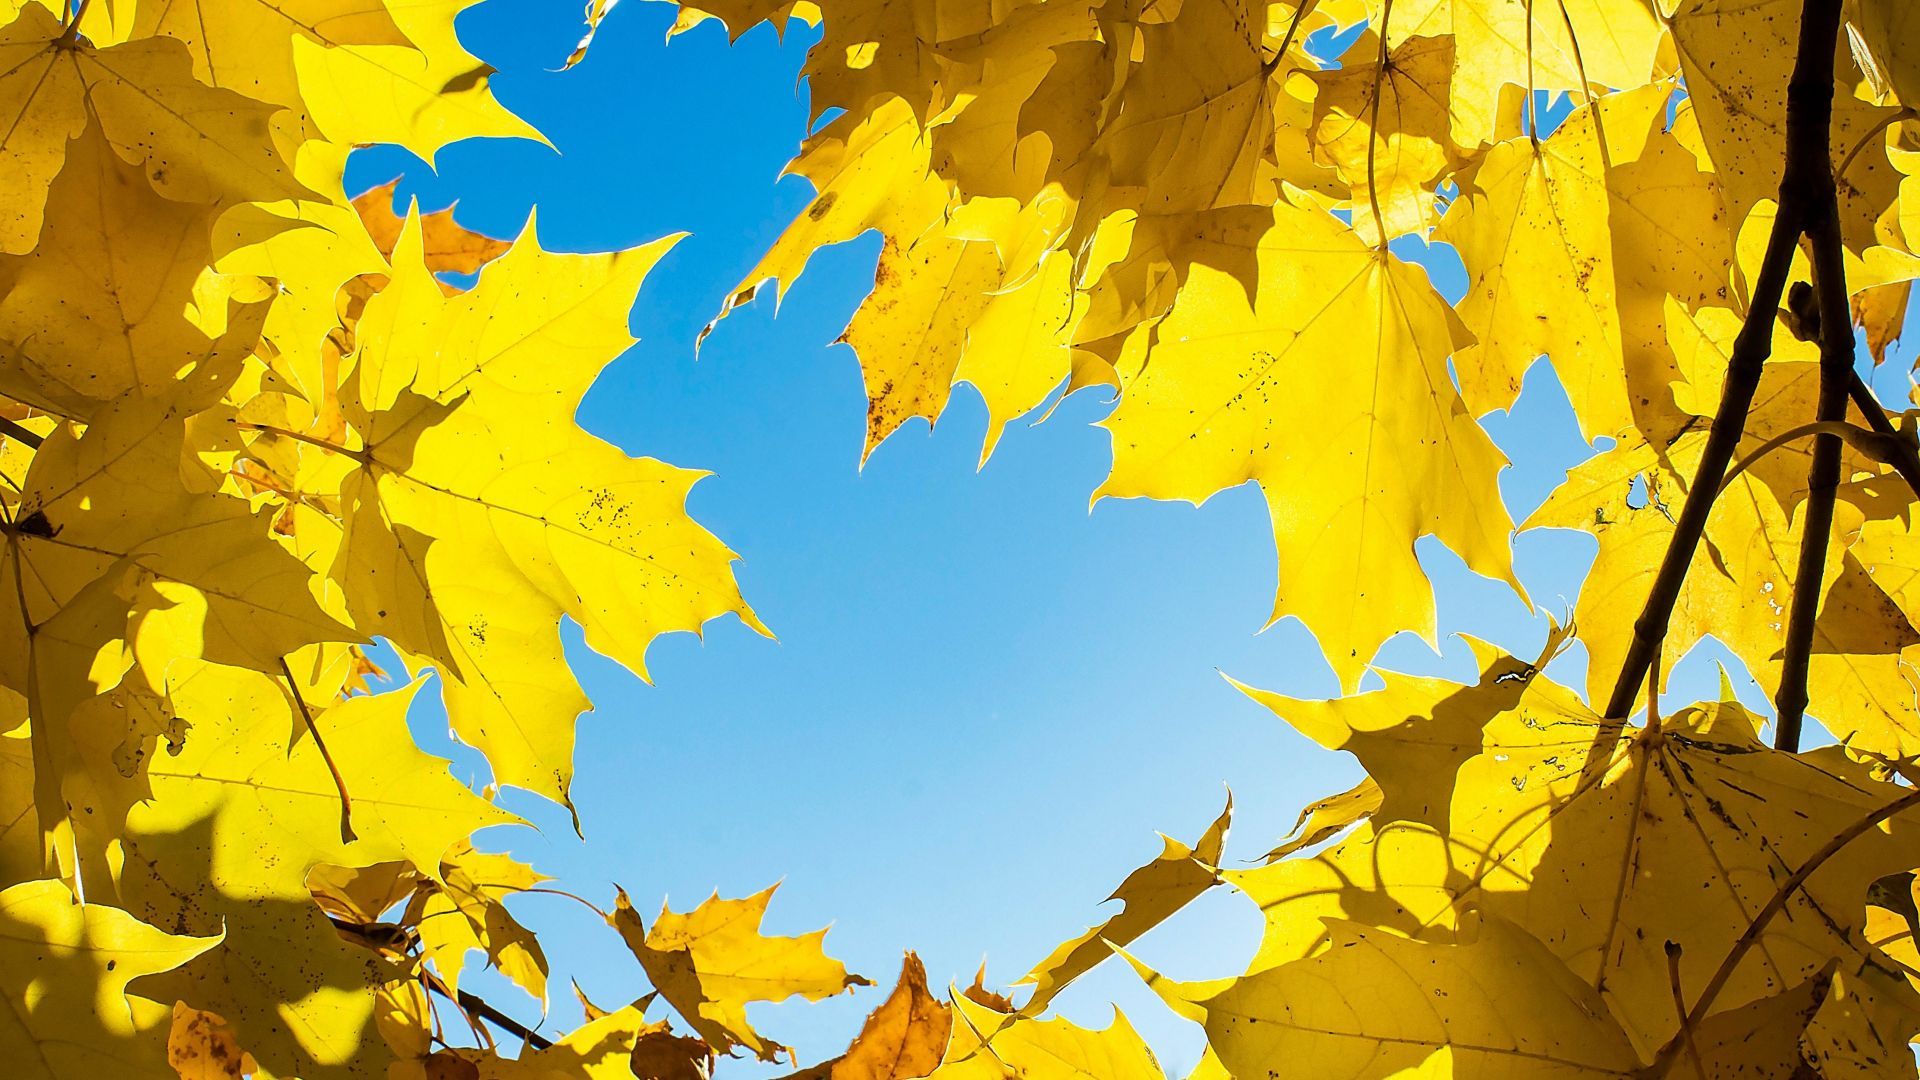 Desktop wallpaper yellow leaves, maple's leaves, autumn, HD image, picture, background, 9a7fd1